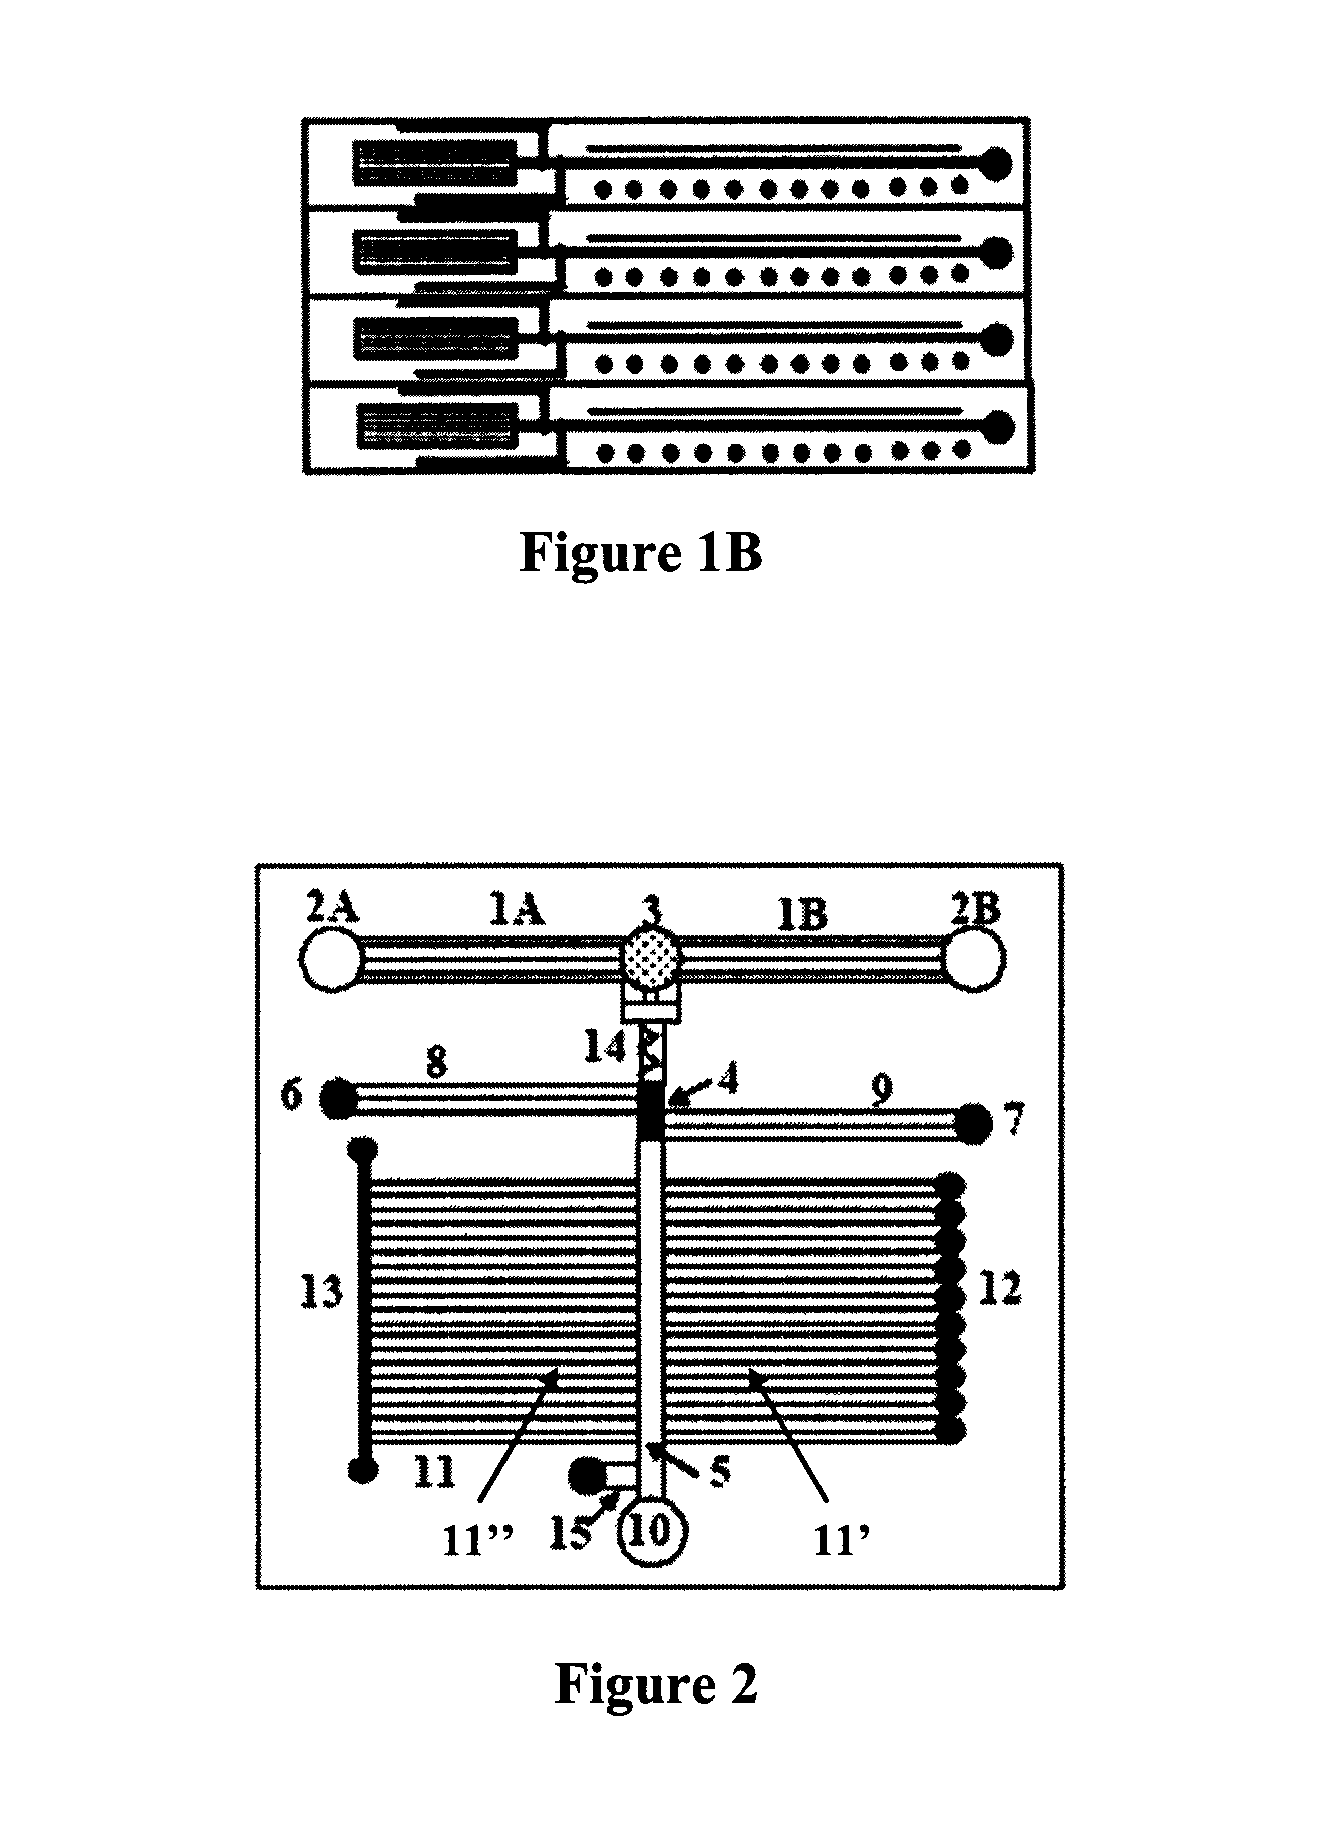 Microfluidic devices and methods facilitating high-throughput, on-chip detection and separation techniques